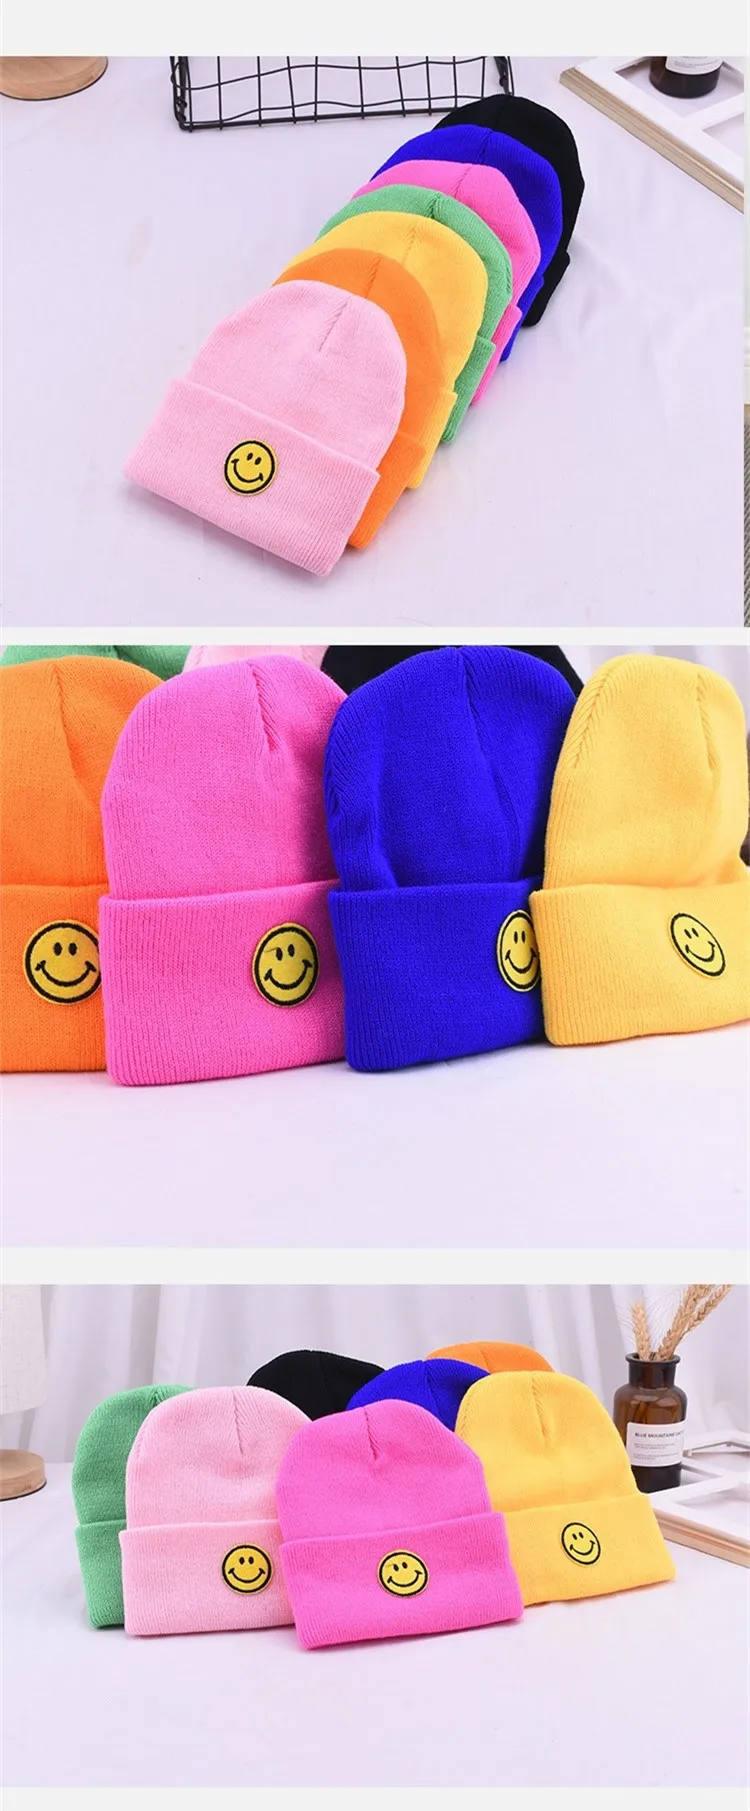 Korean Candy Color Kids Knitted Yarn Hat Autumn Winter Warm Lovely Smiley Face Pullover Baby Skullcap Girl Boy Beanies Soft Caps blue skully hat